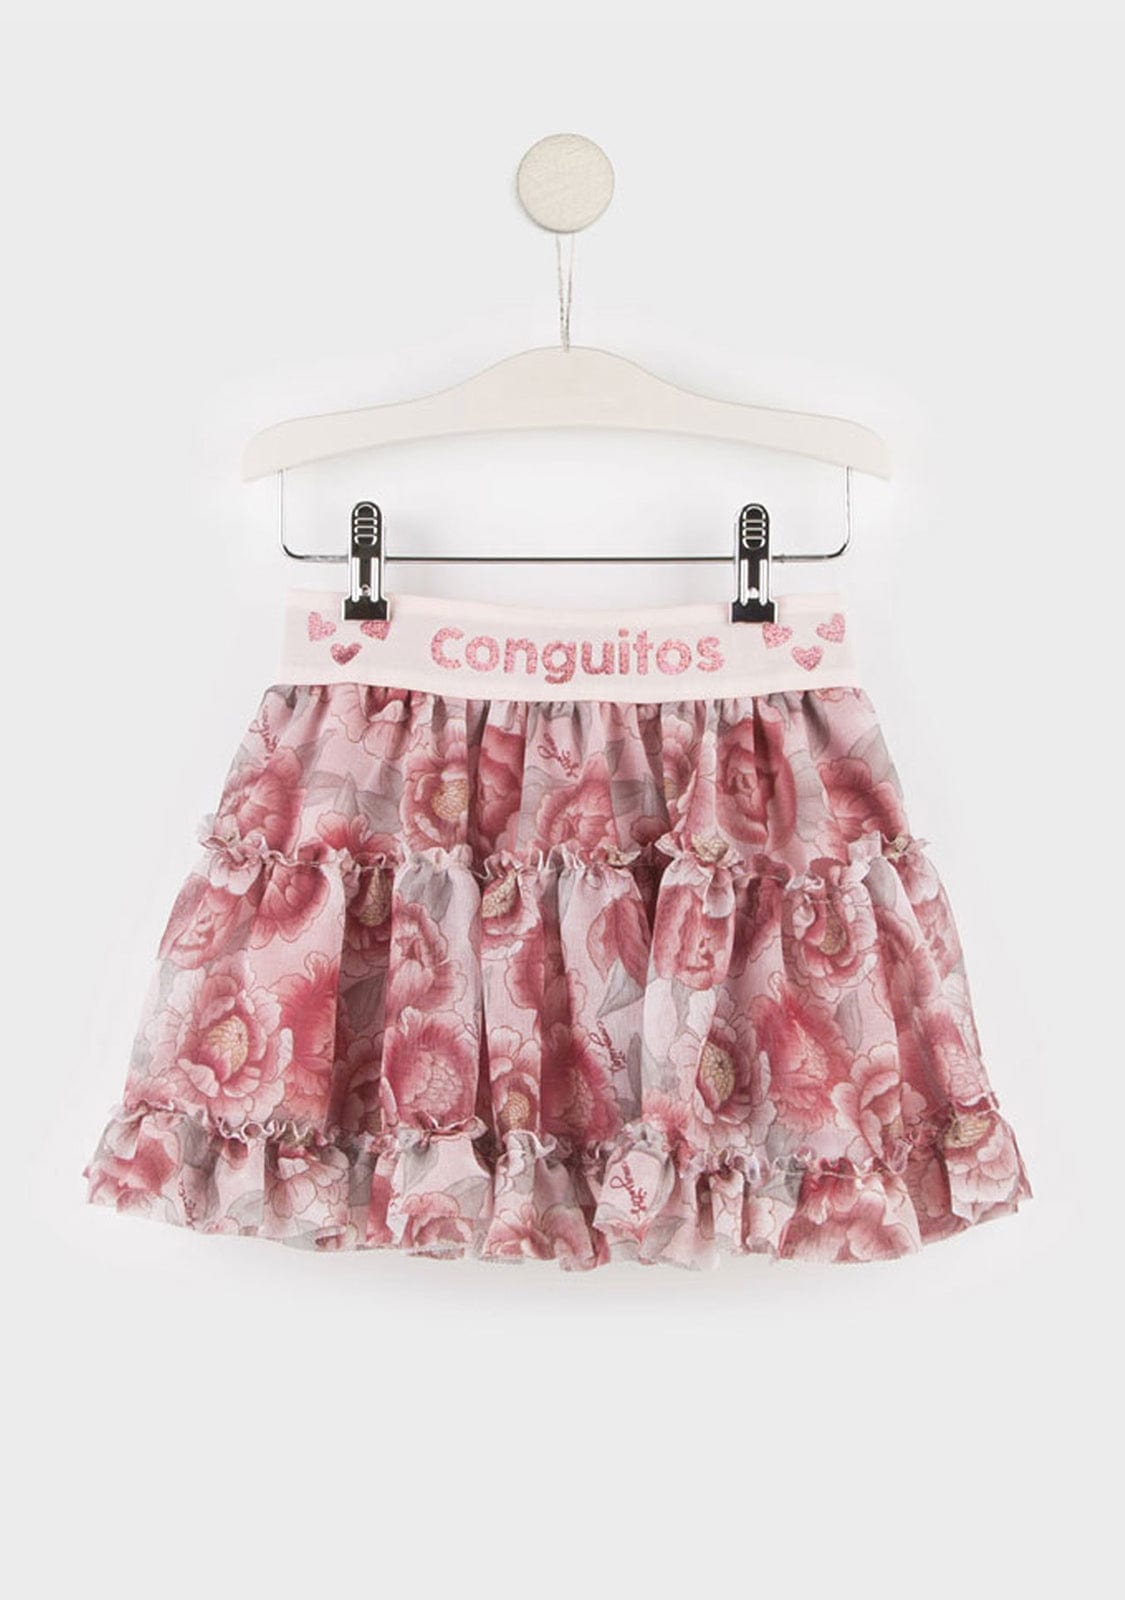 CONGUITOS TEXTIL Clothing Girl's Pink Flowers Tulle Skirt